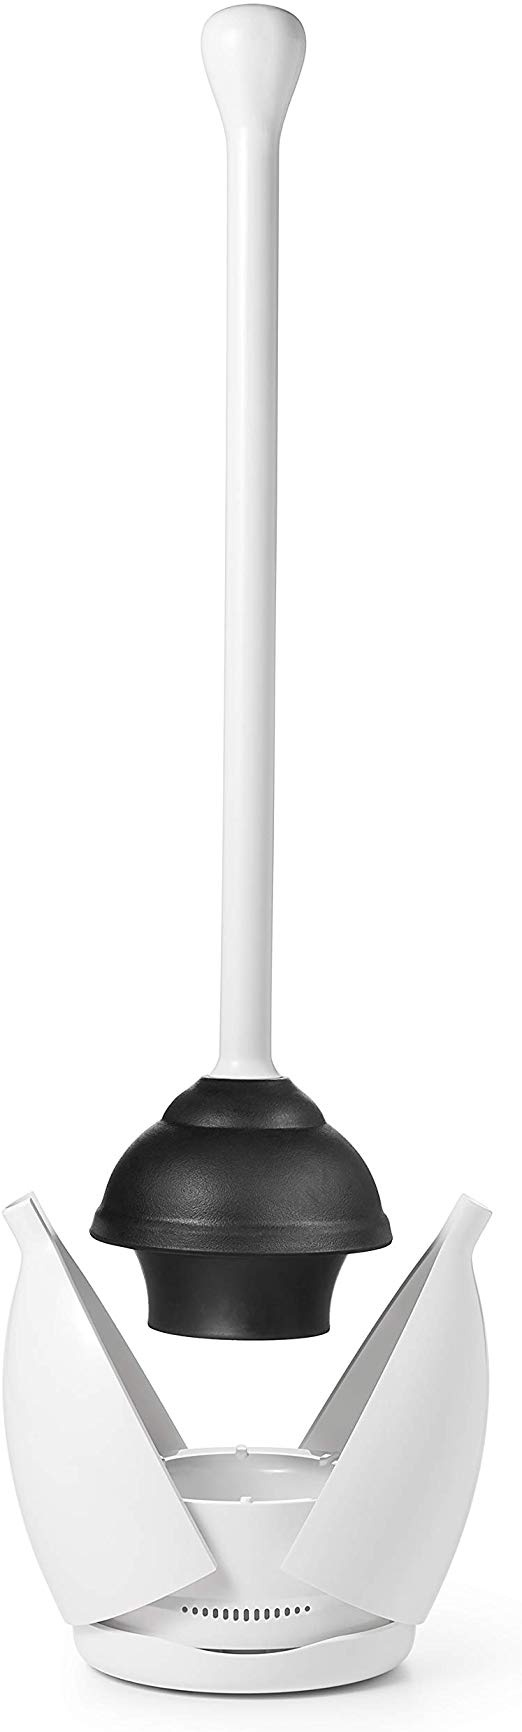 Oxo Good Grips Toilet Plunger with Holder, White